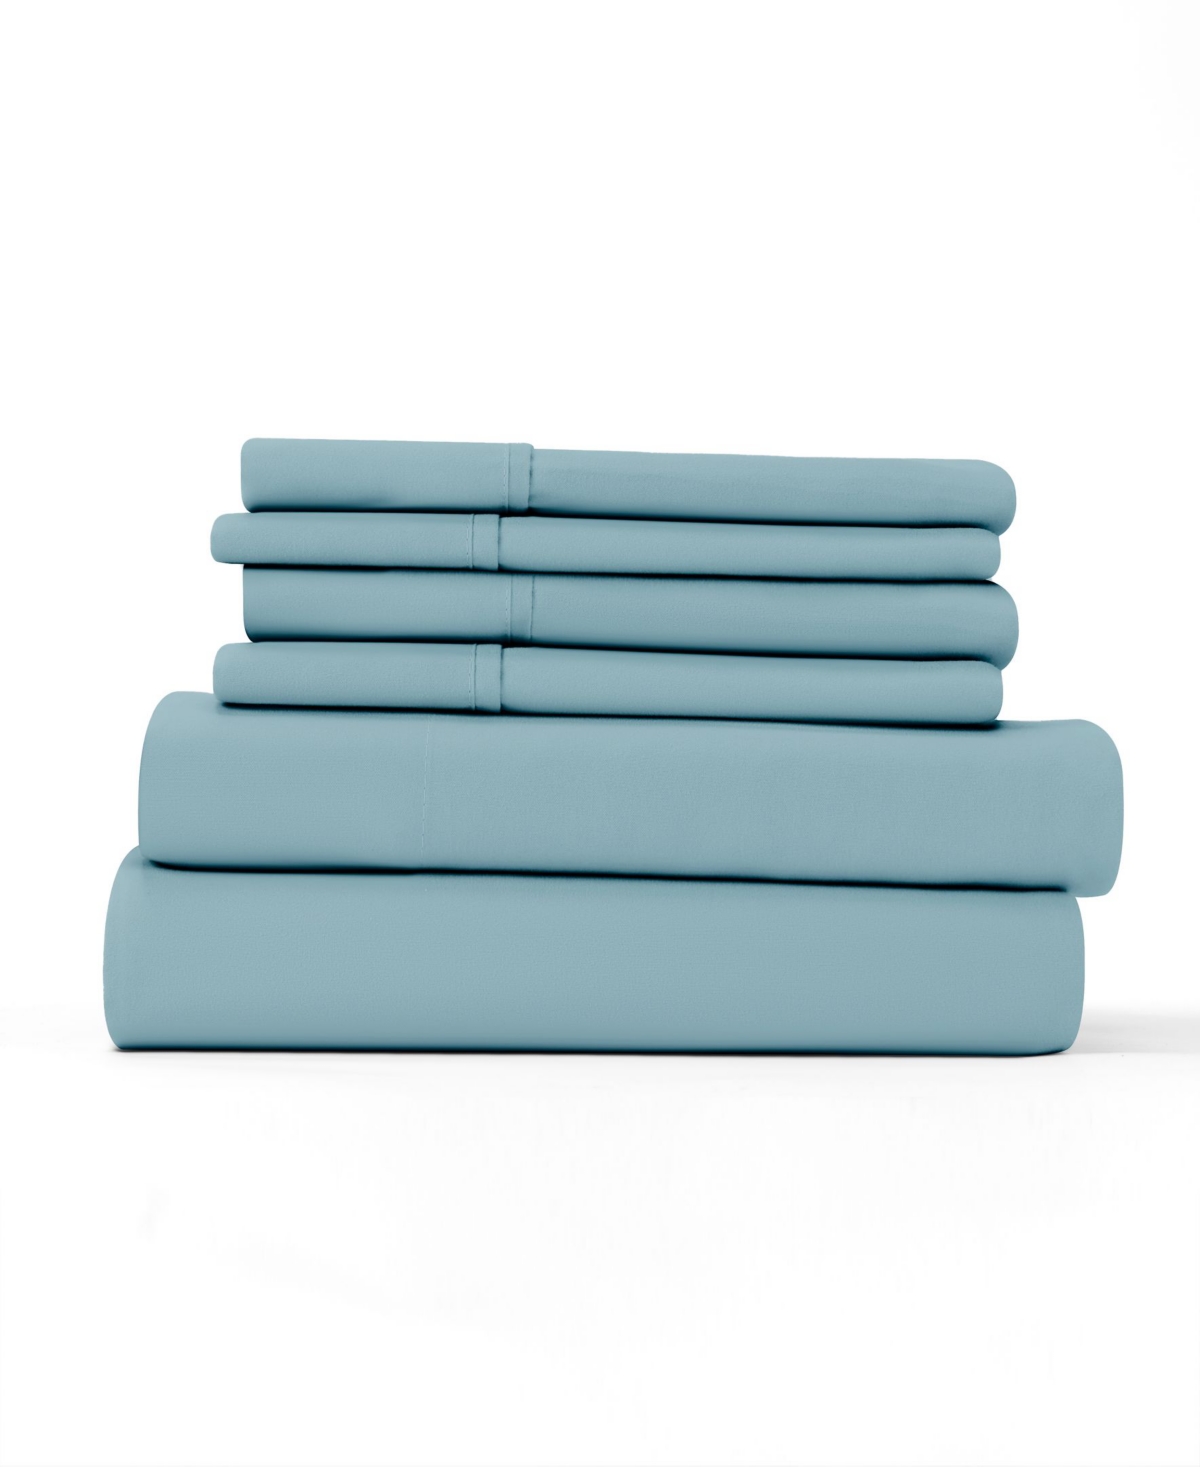 Ienjoy Home Solids In Style By The Home Collection 6 Piece Bed Sheet Set, King Bedding In Ocean